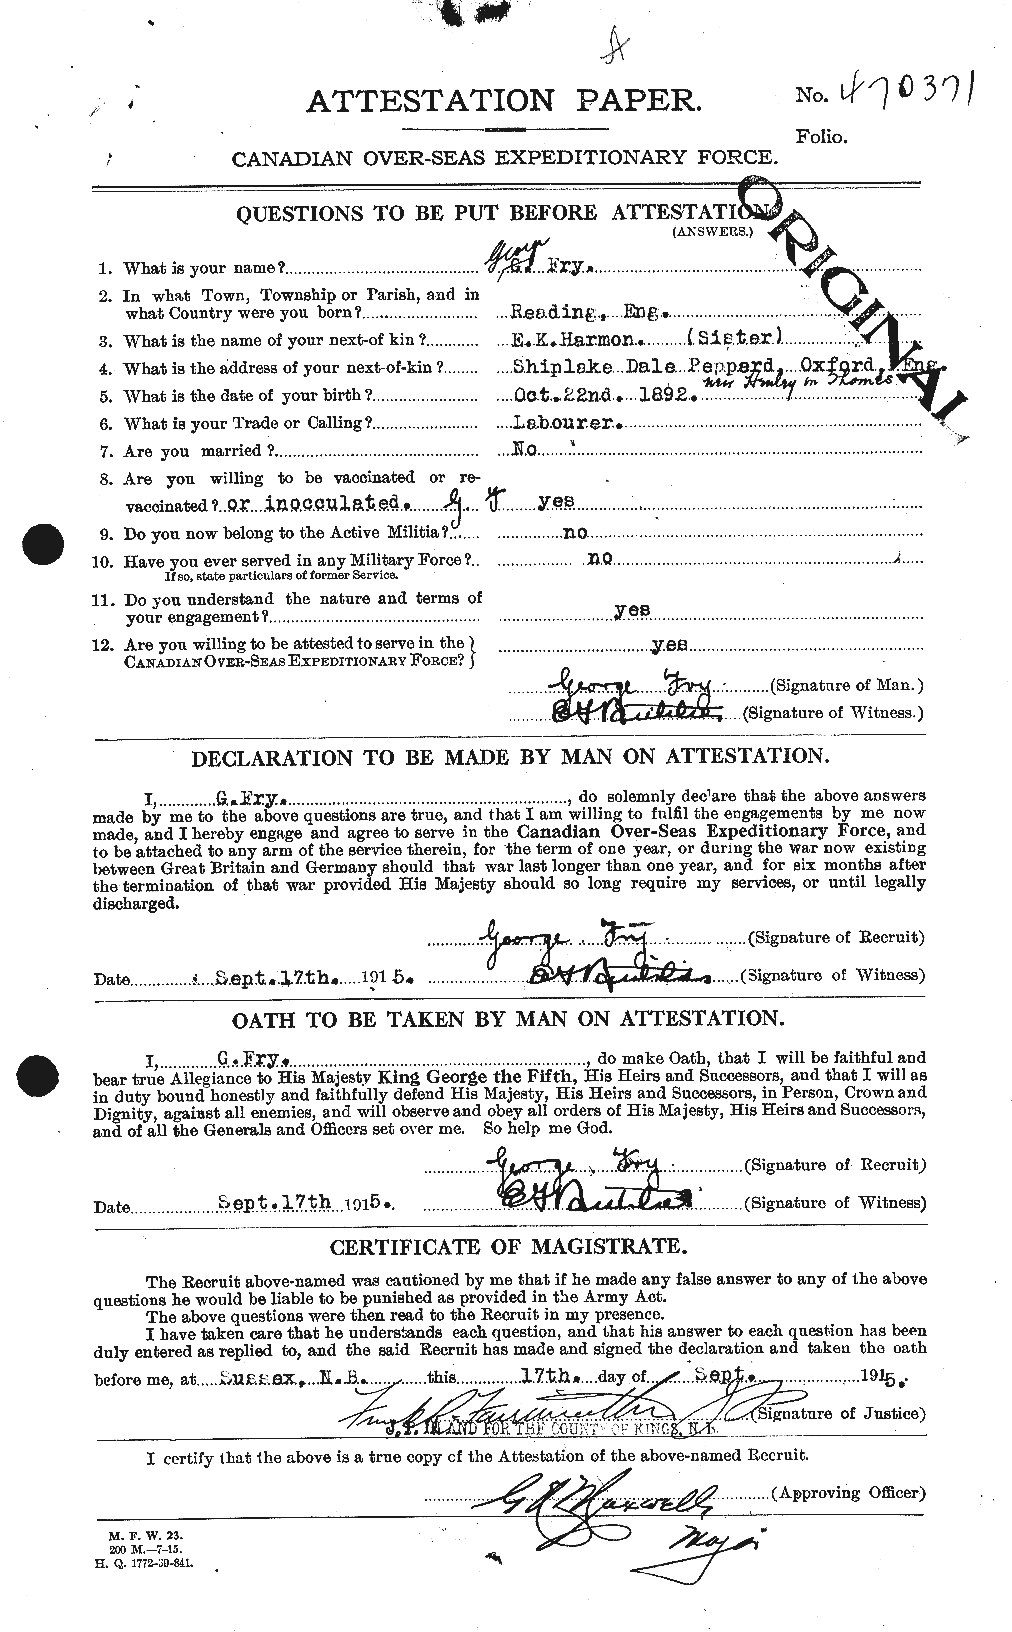 Personnel Records of the First World War - CEF 336908a